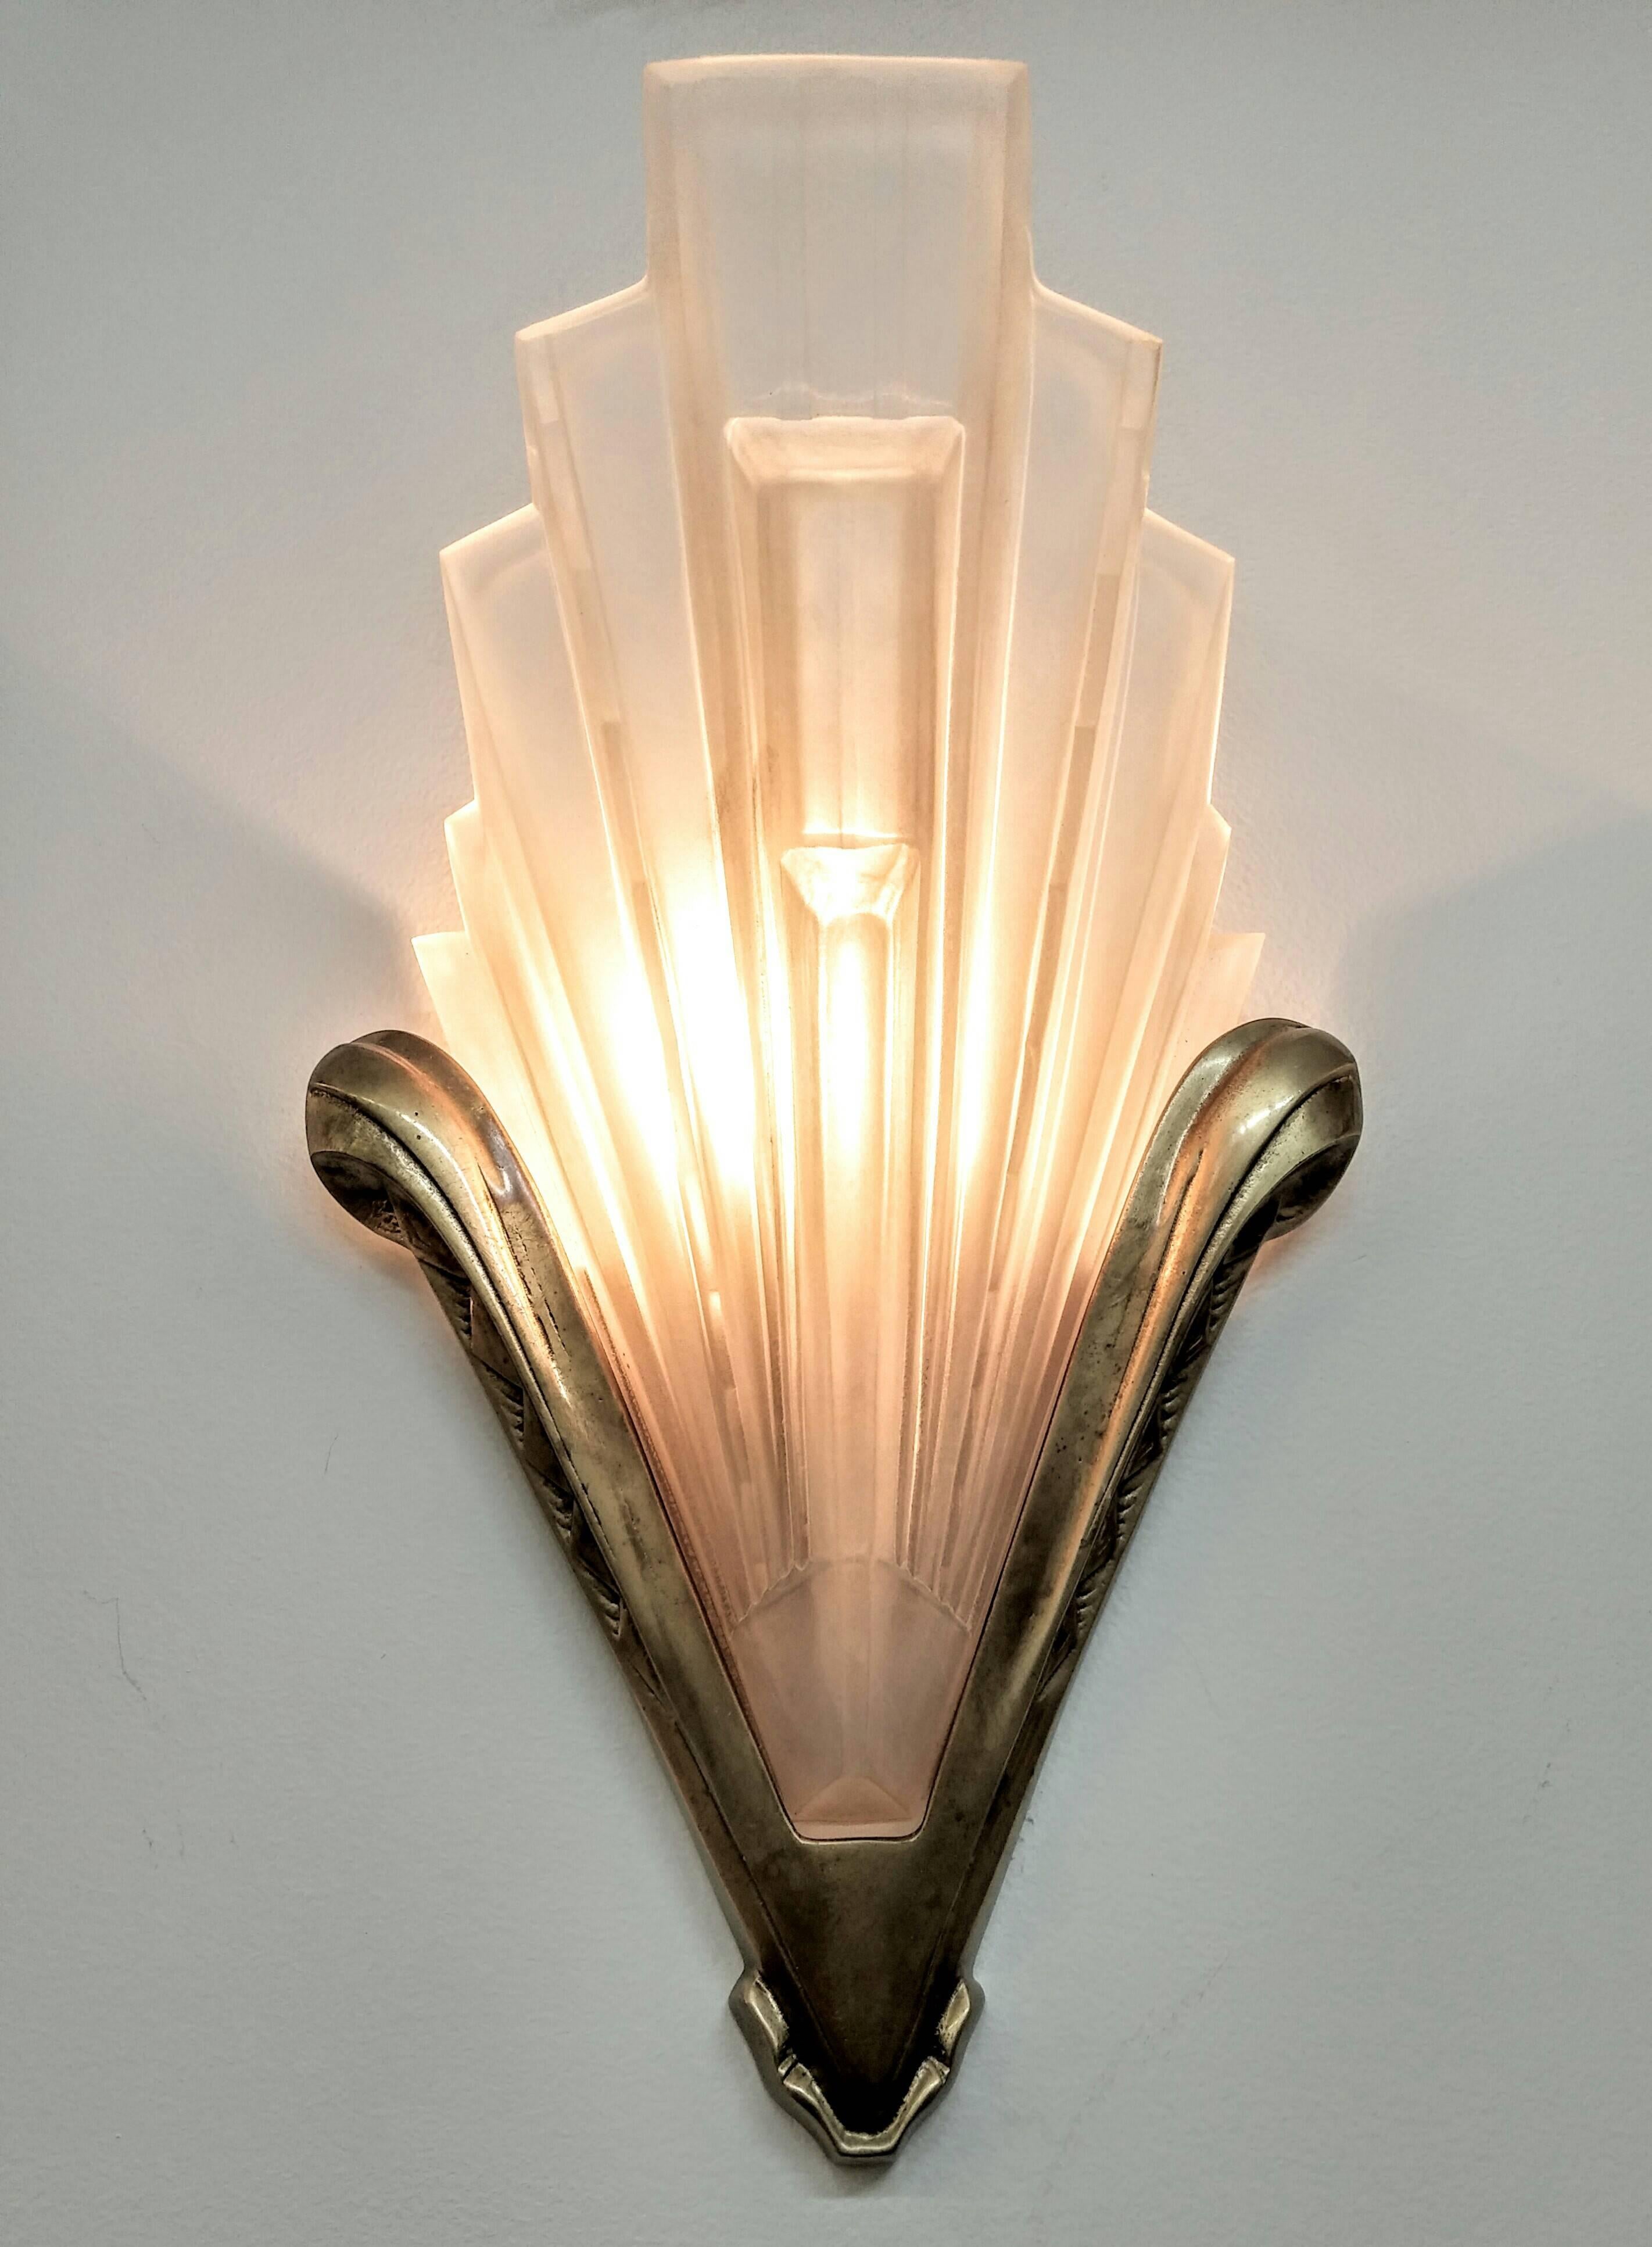 
A pair of French Art Deco wall sconces by French artist “ Sabino 